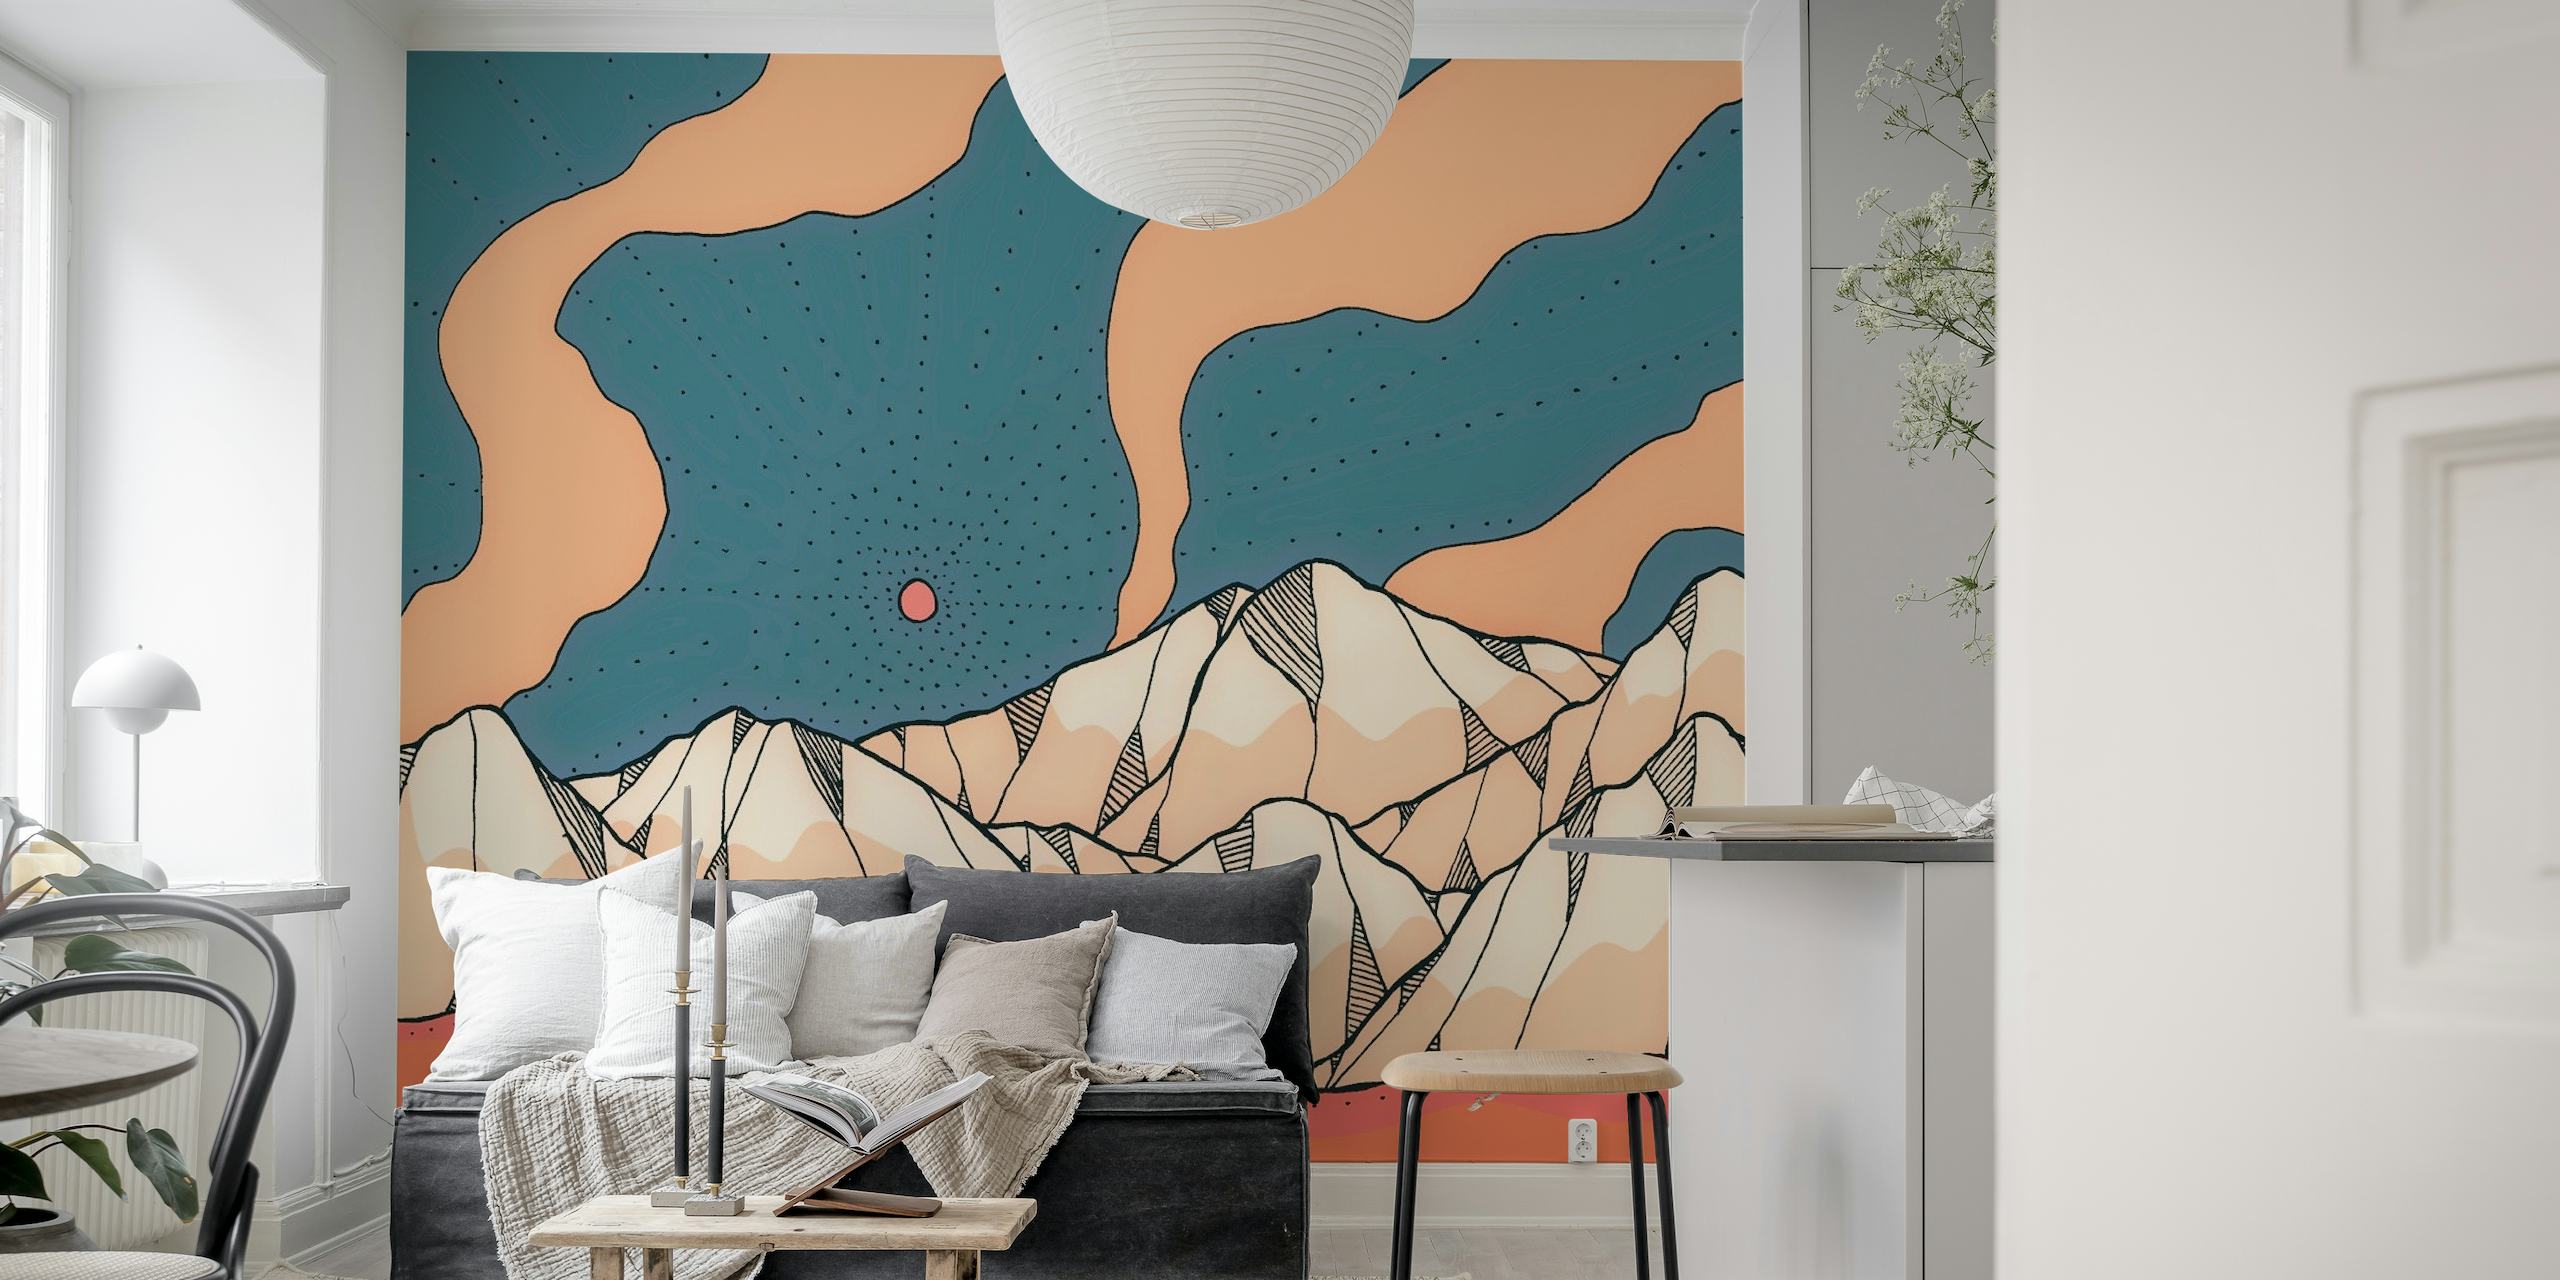 Abstract orange and blue mountainous landscape wall mural